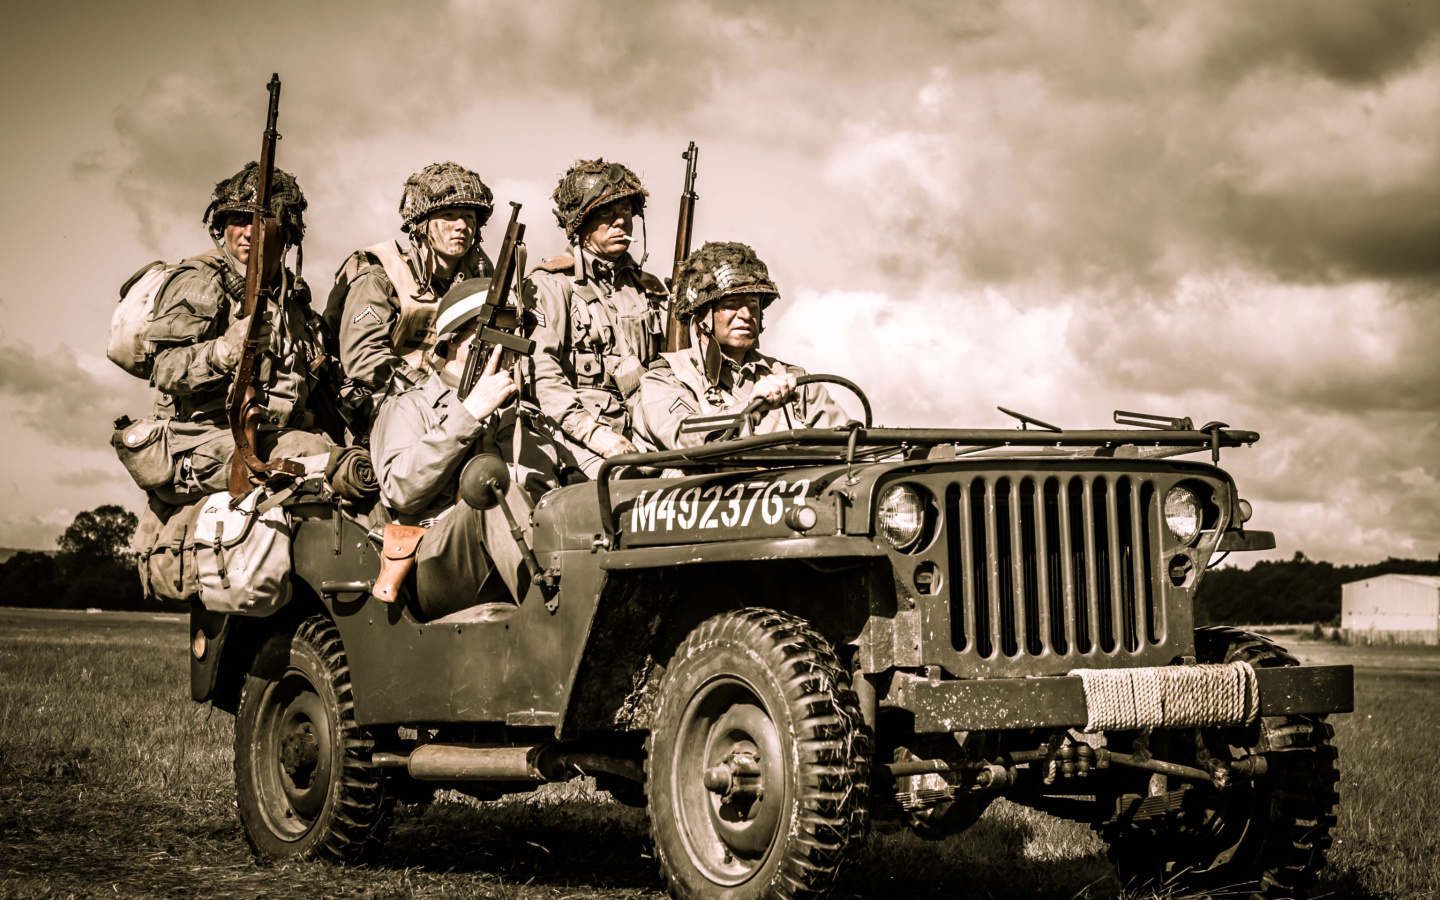 Das Soldiers on Jeep Wallpaper 1440x900